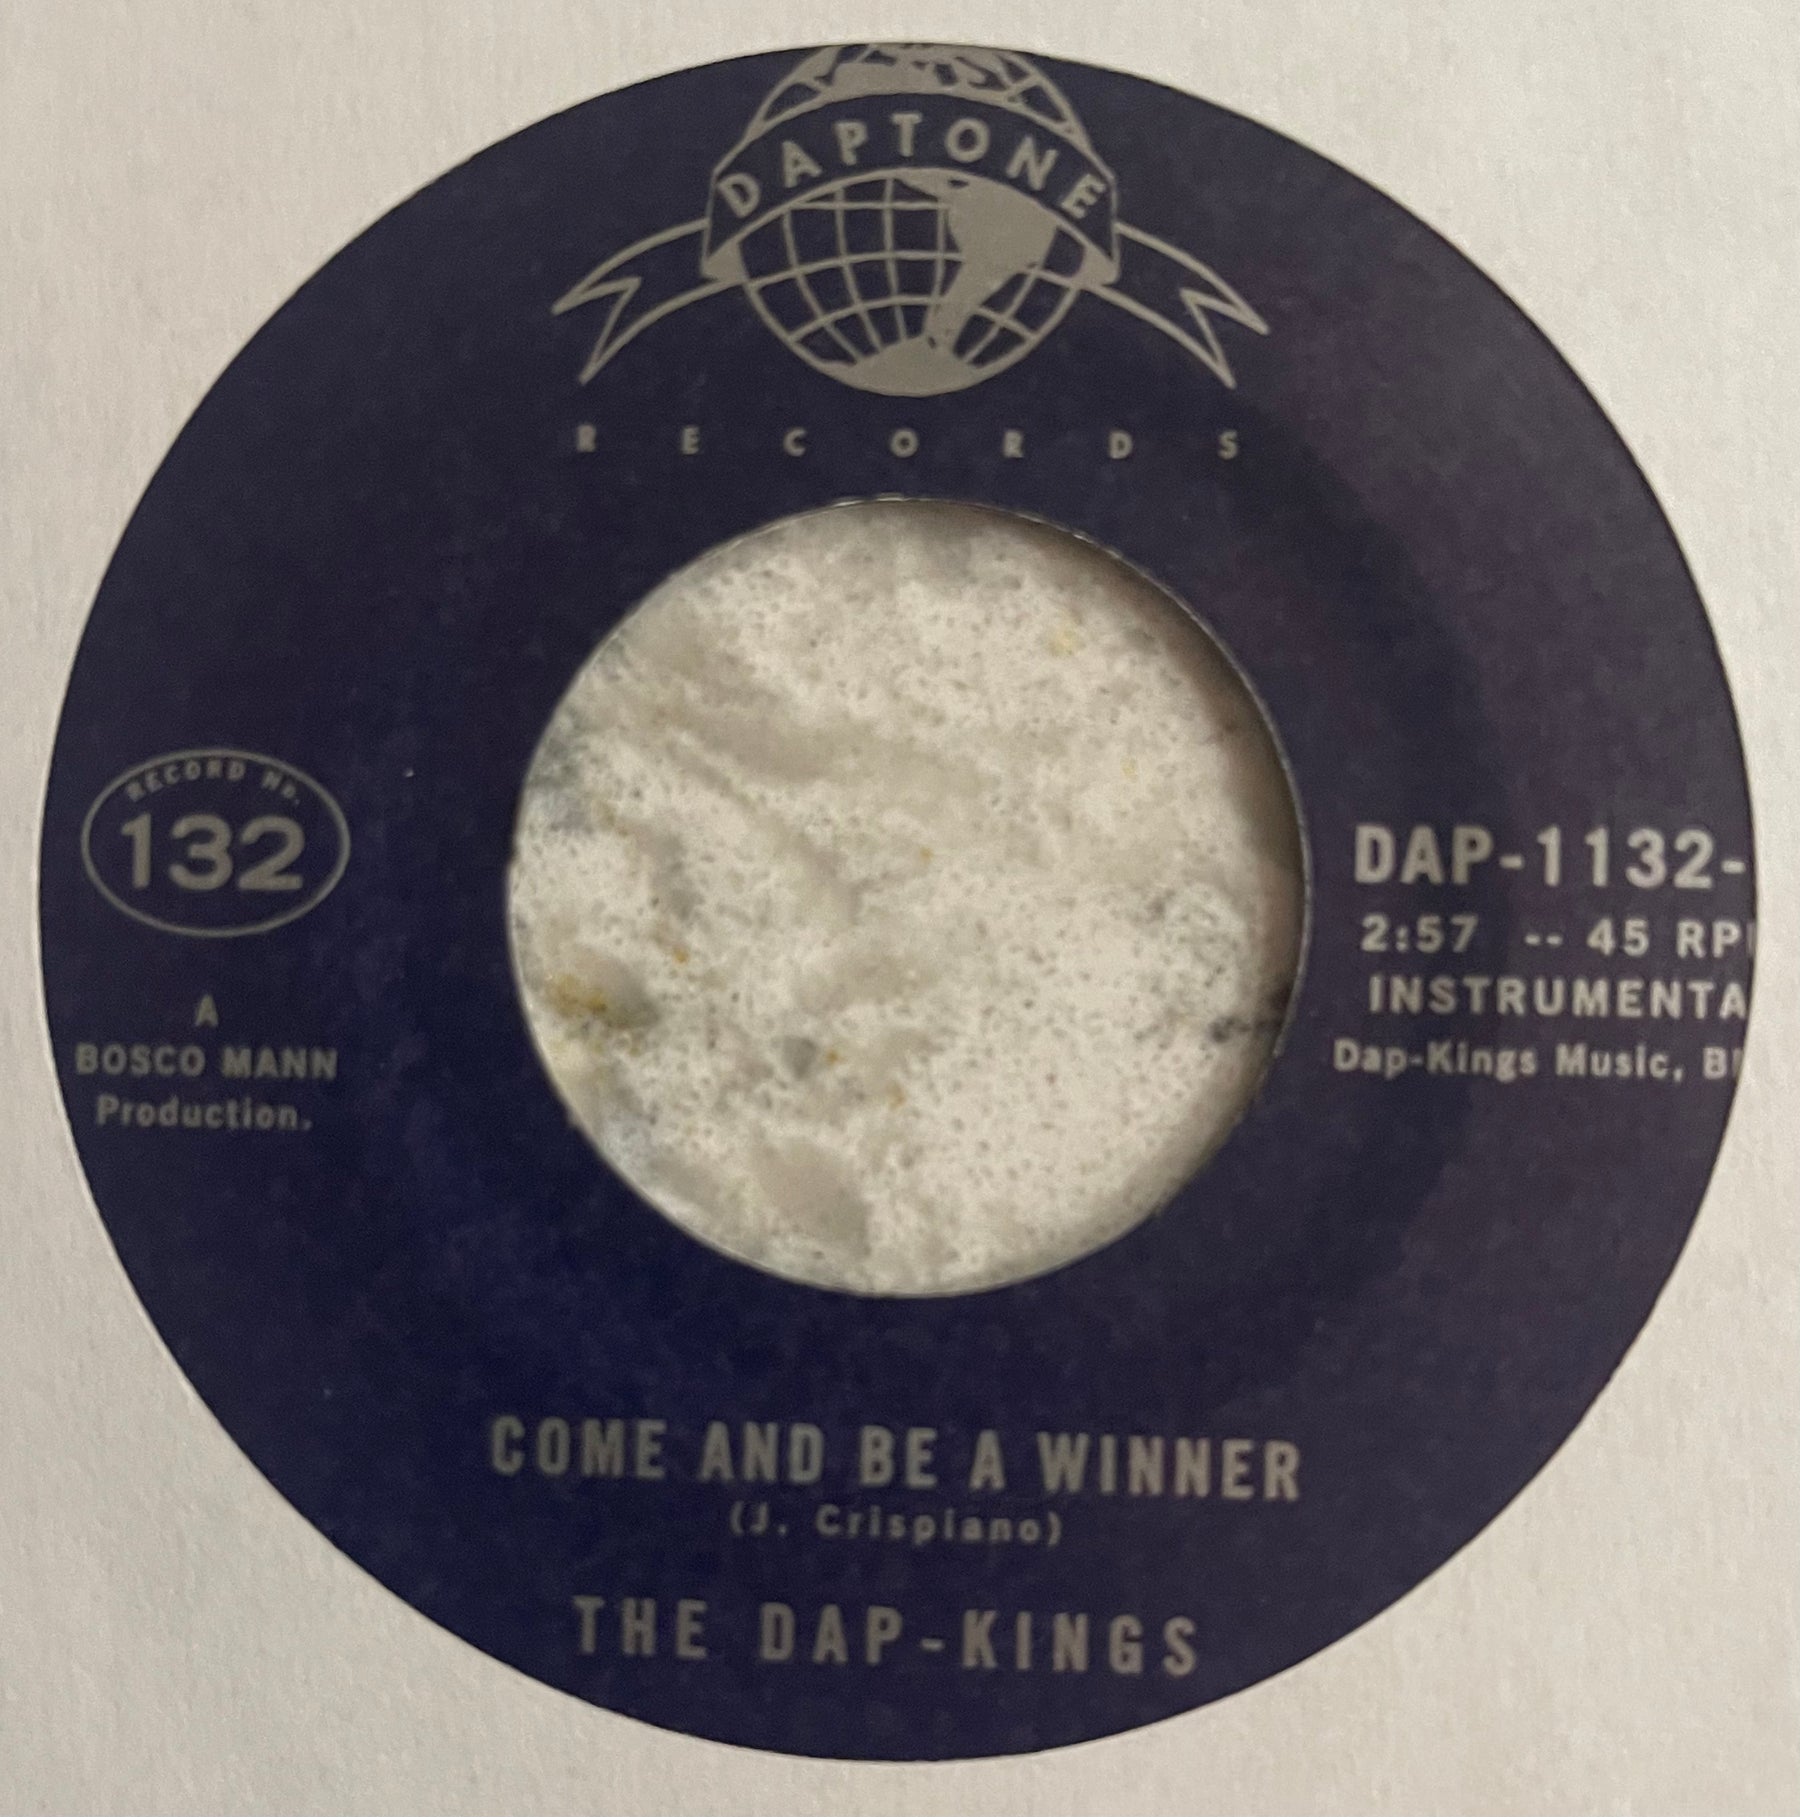 Sharon Jones and The Dap-Kings - Come Be A Winner b/w Inst